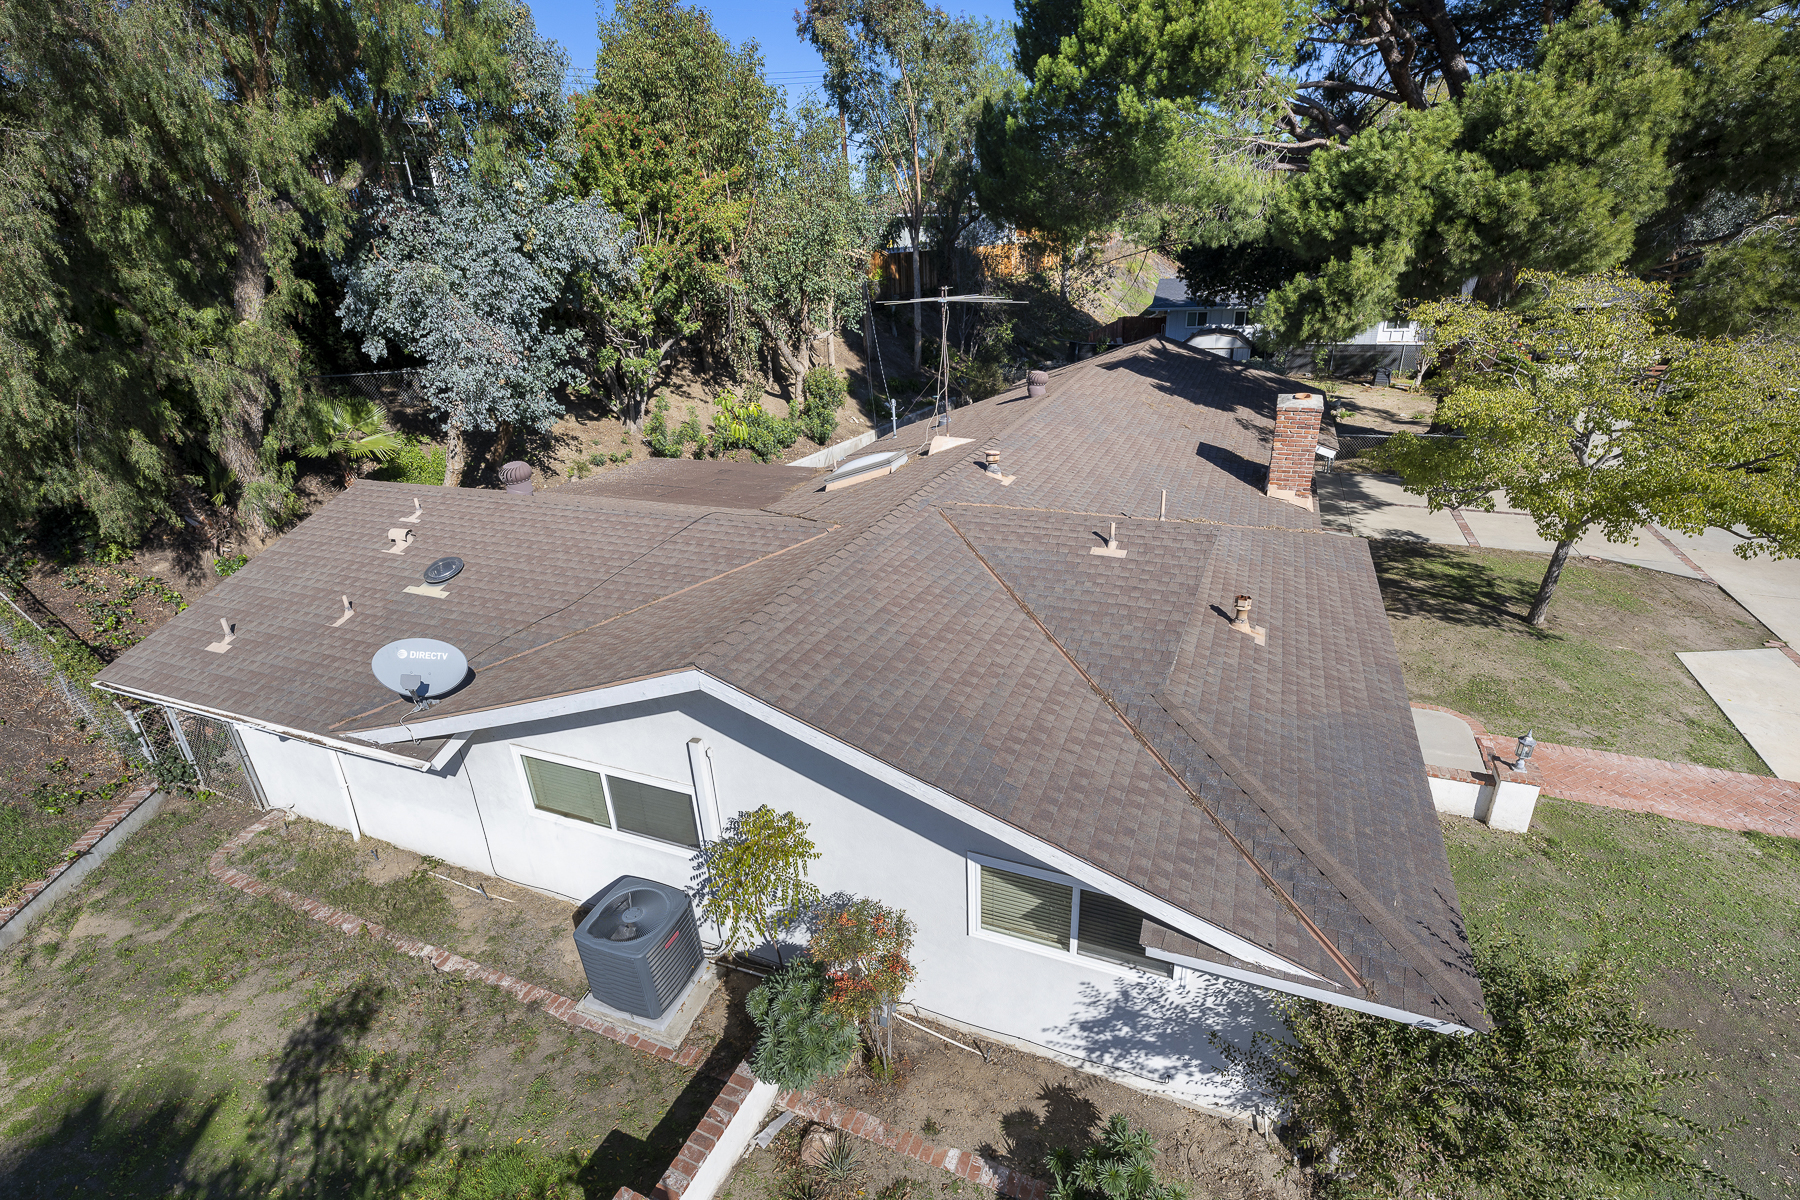 1337 Sheppard Drive, Fullerton, CA 92831 view of home exterior close up on roof